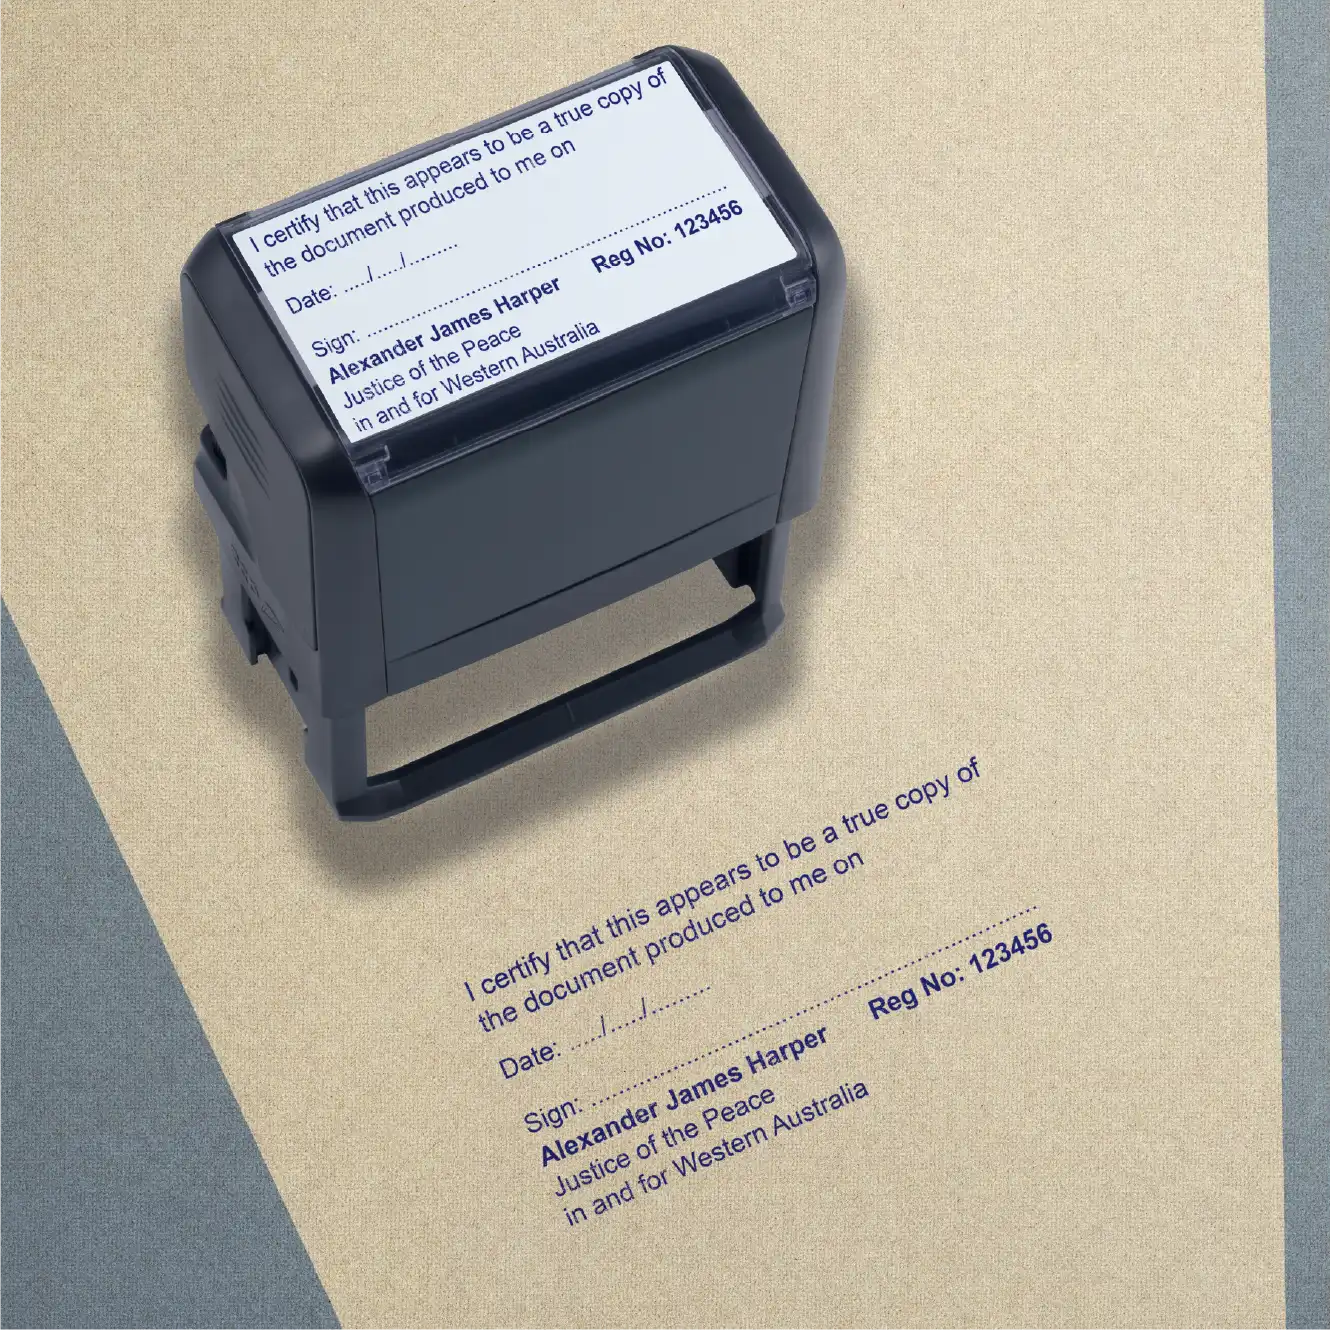 Self-inking Justice of the peace rubber stamp Custom True copy with user details blue ink 